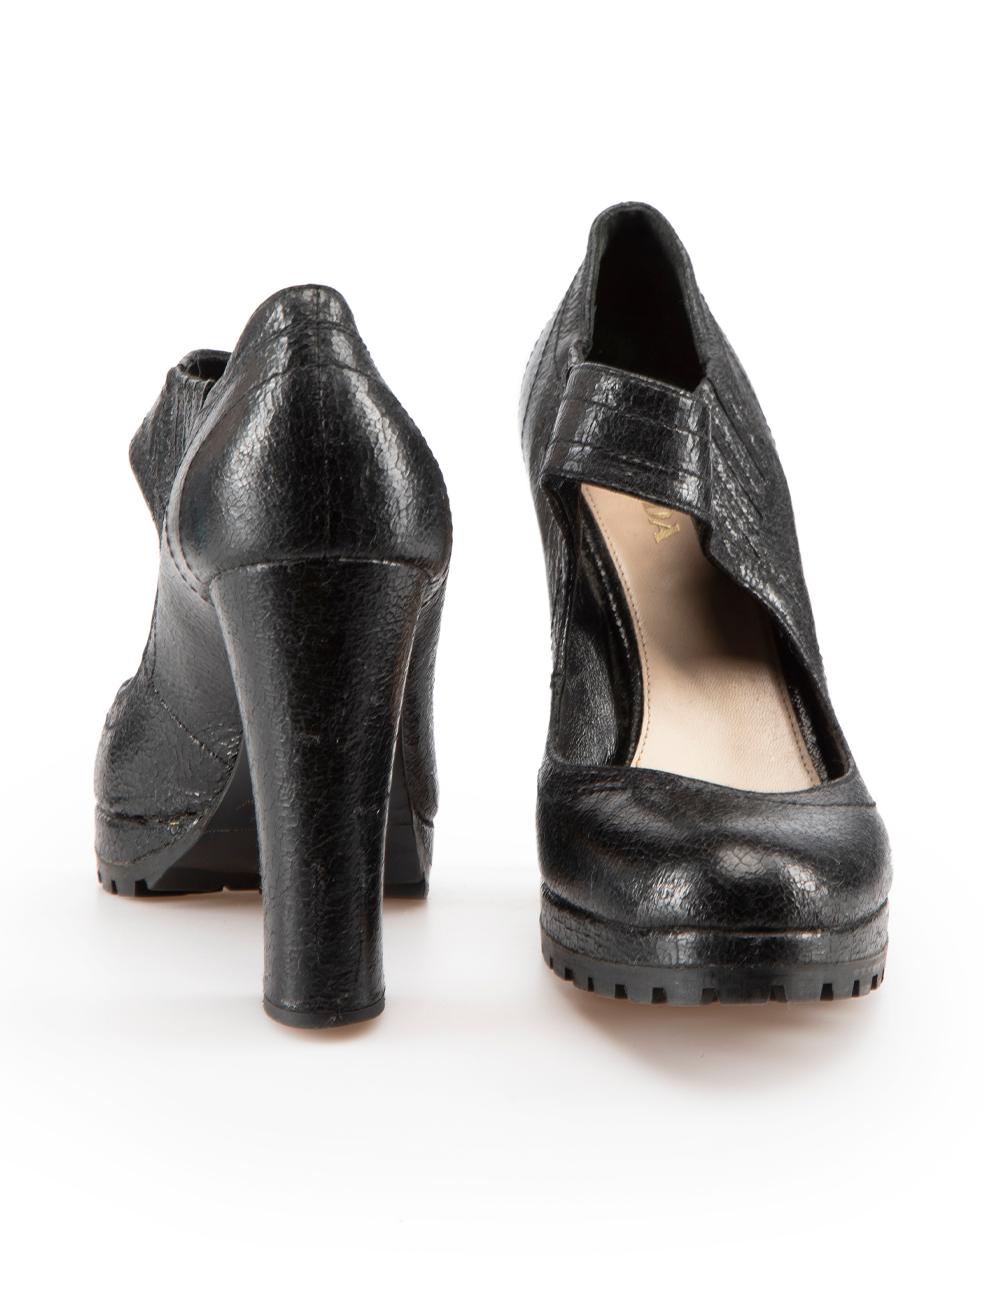 Prada Black Leather Craquelure Mary-Jane Heels Size IT 39 In Good Condition For Sale In London, GB